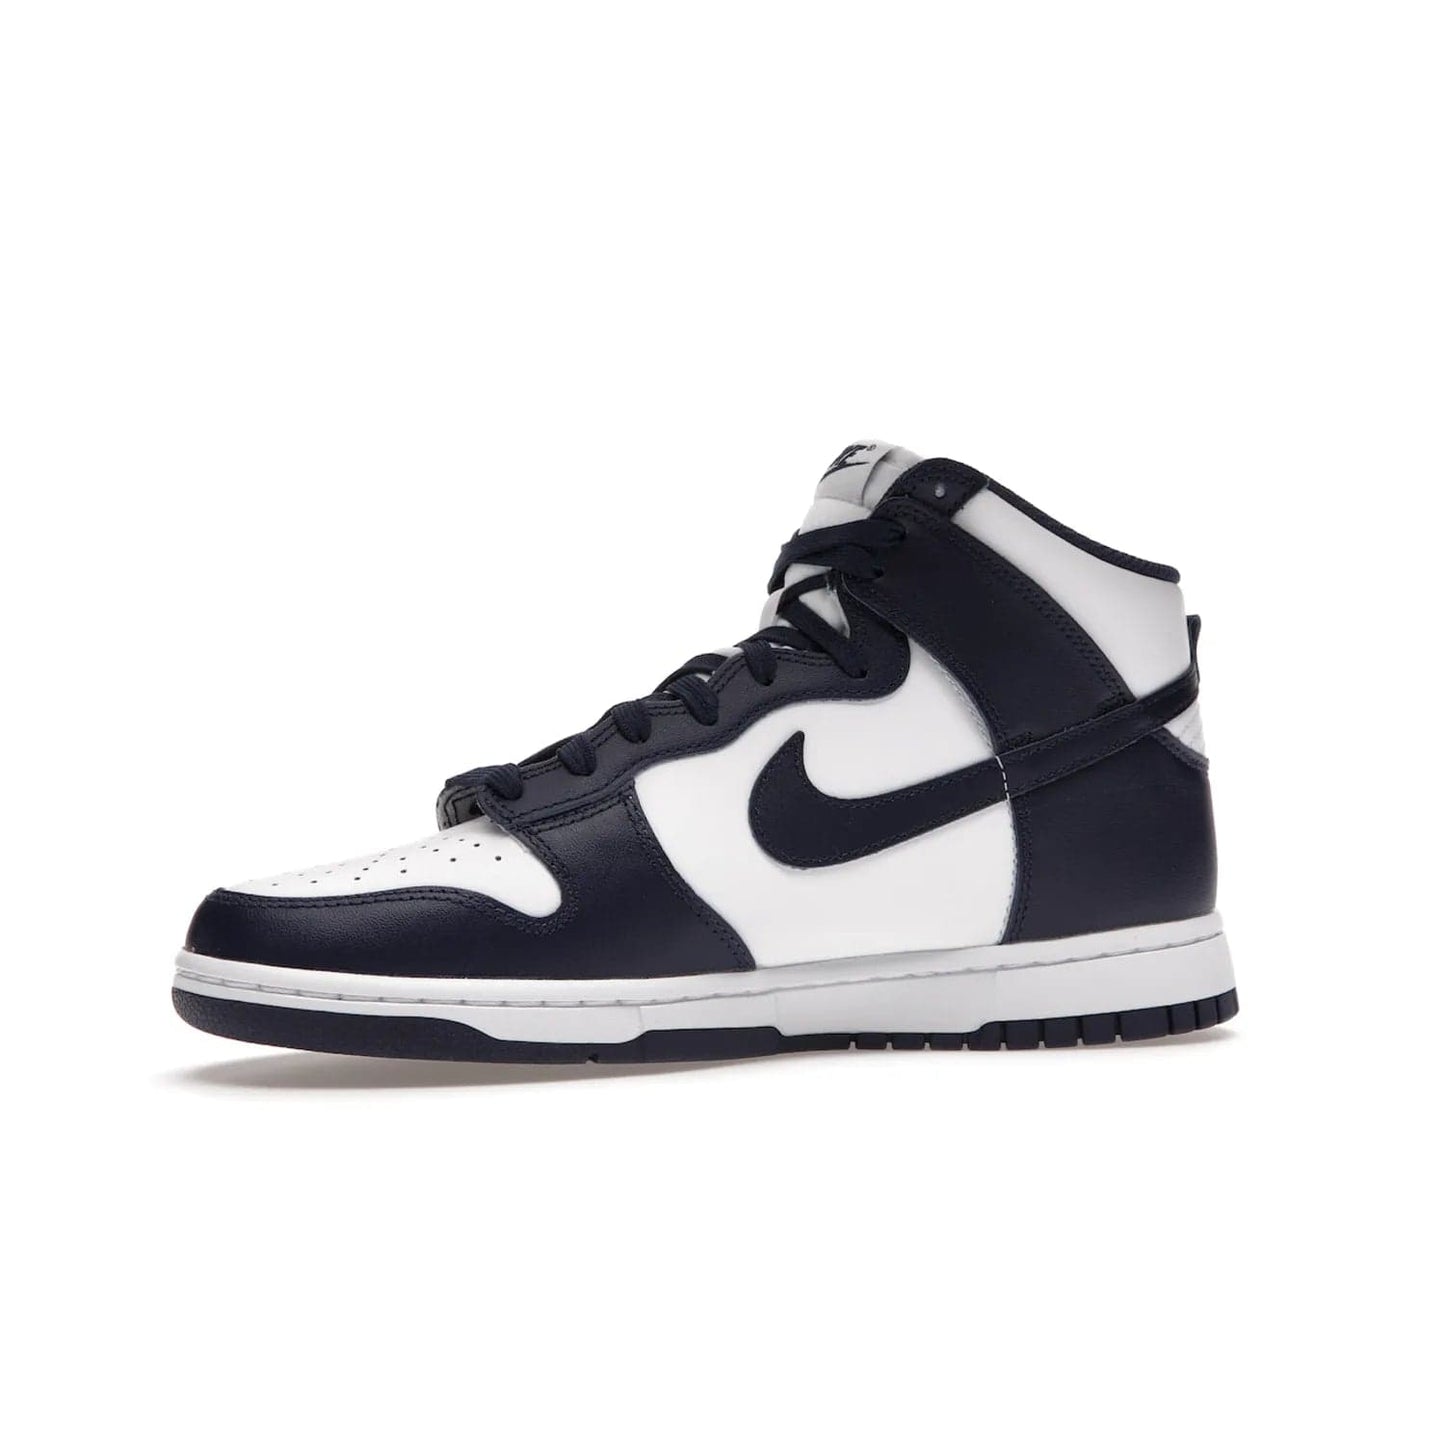 Nike Dunk High Championship Navy - Image 17 - Only at www.BallersClubKickz.com - Classic athletic style meets striking color-blocking on the Nike Dunk High Championship Navy. A white leather upper with Championship Navy overlays creates a retro look with a woven tongue label and sole. Unleash your inner champion with the Nike Dunk High Championship Navy.